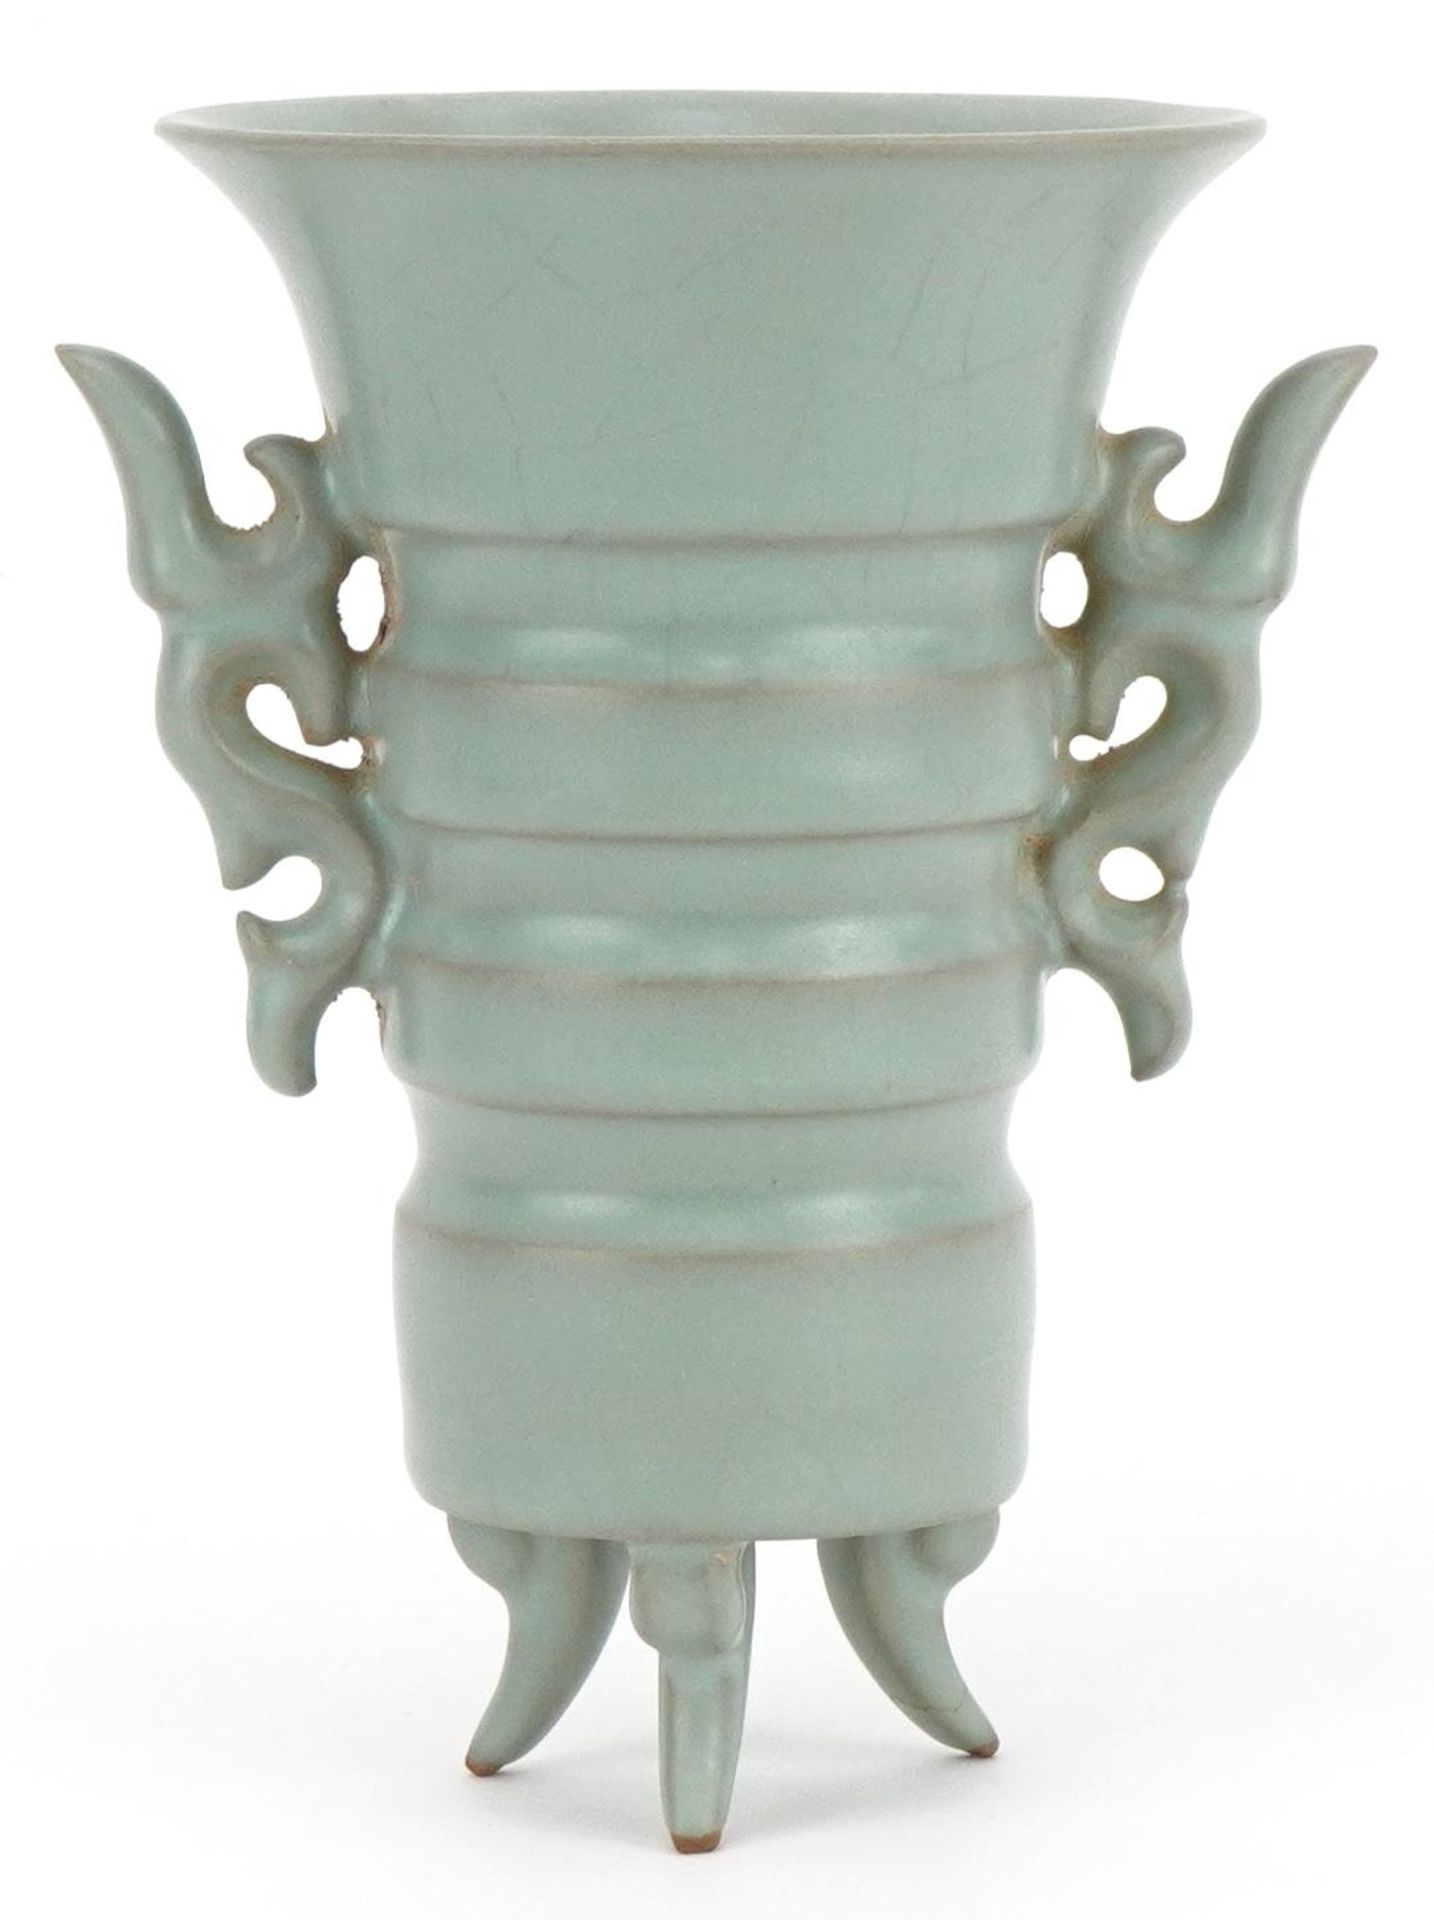 Chinese porcelain tripod vase with twin handles having a celadon glaze, 15.5cm high : For further - Image 3 of 6